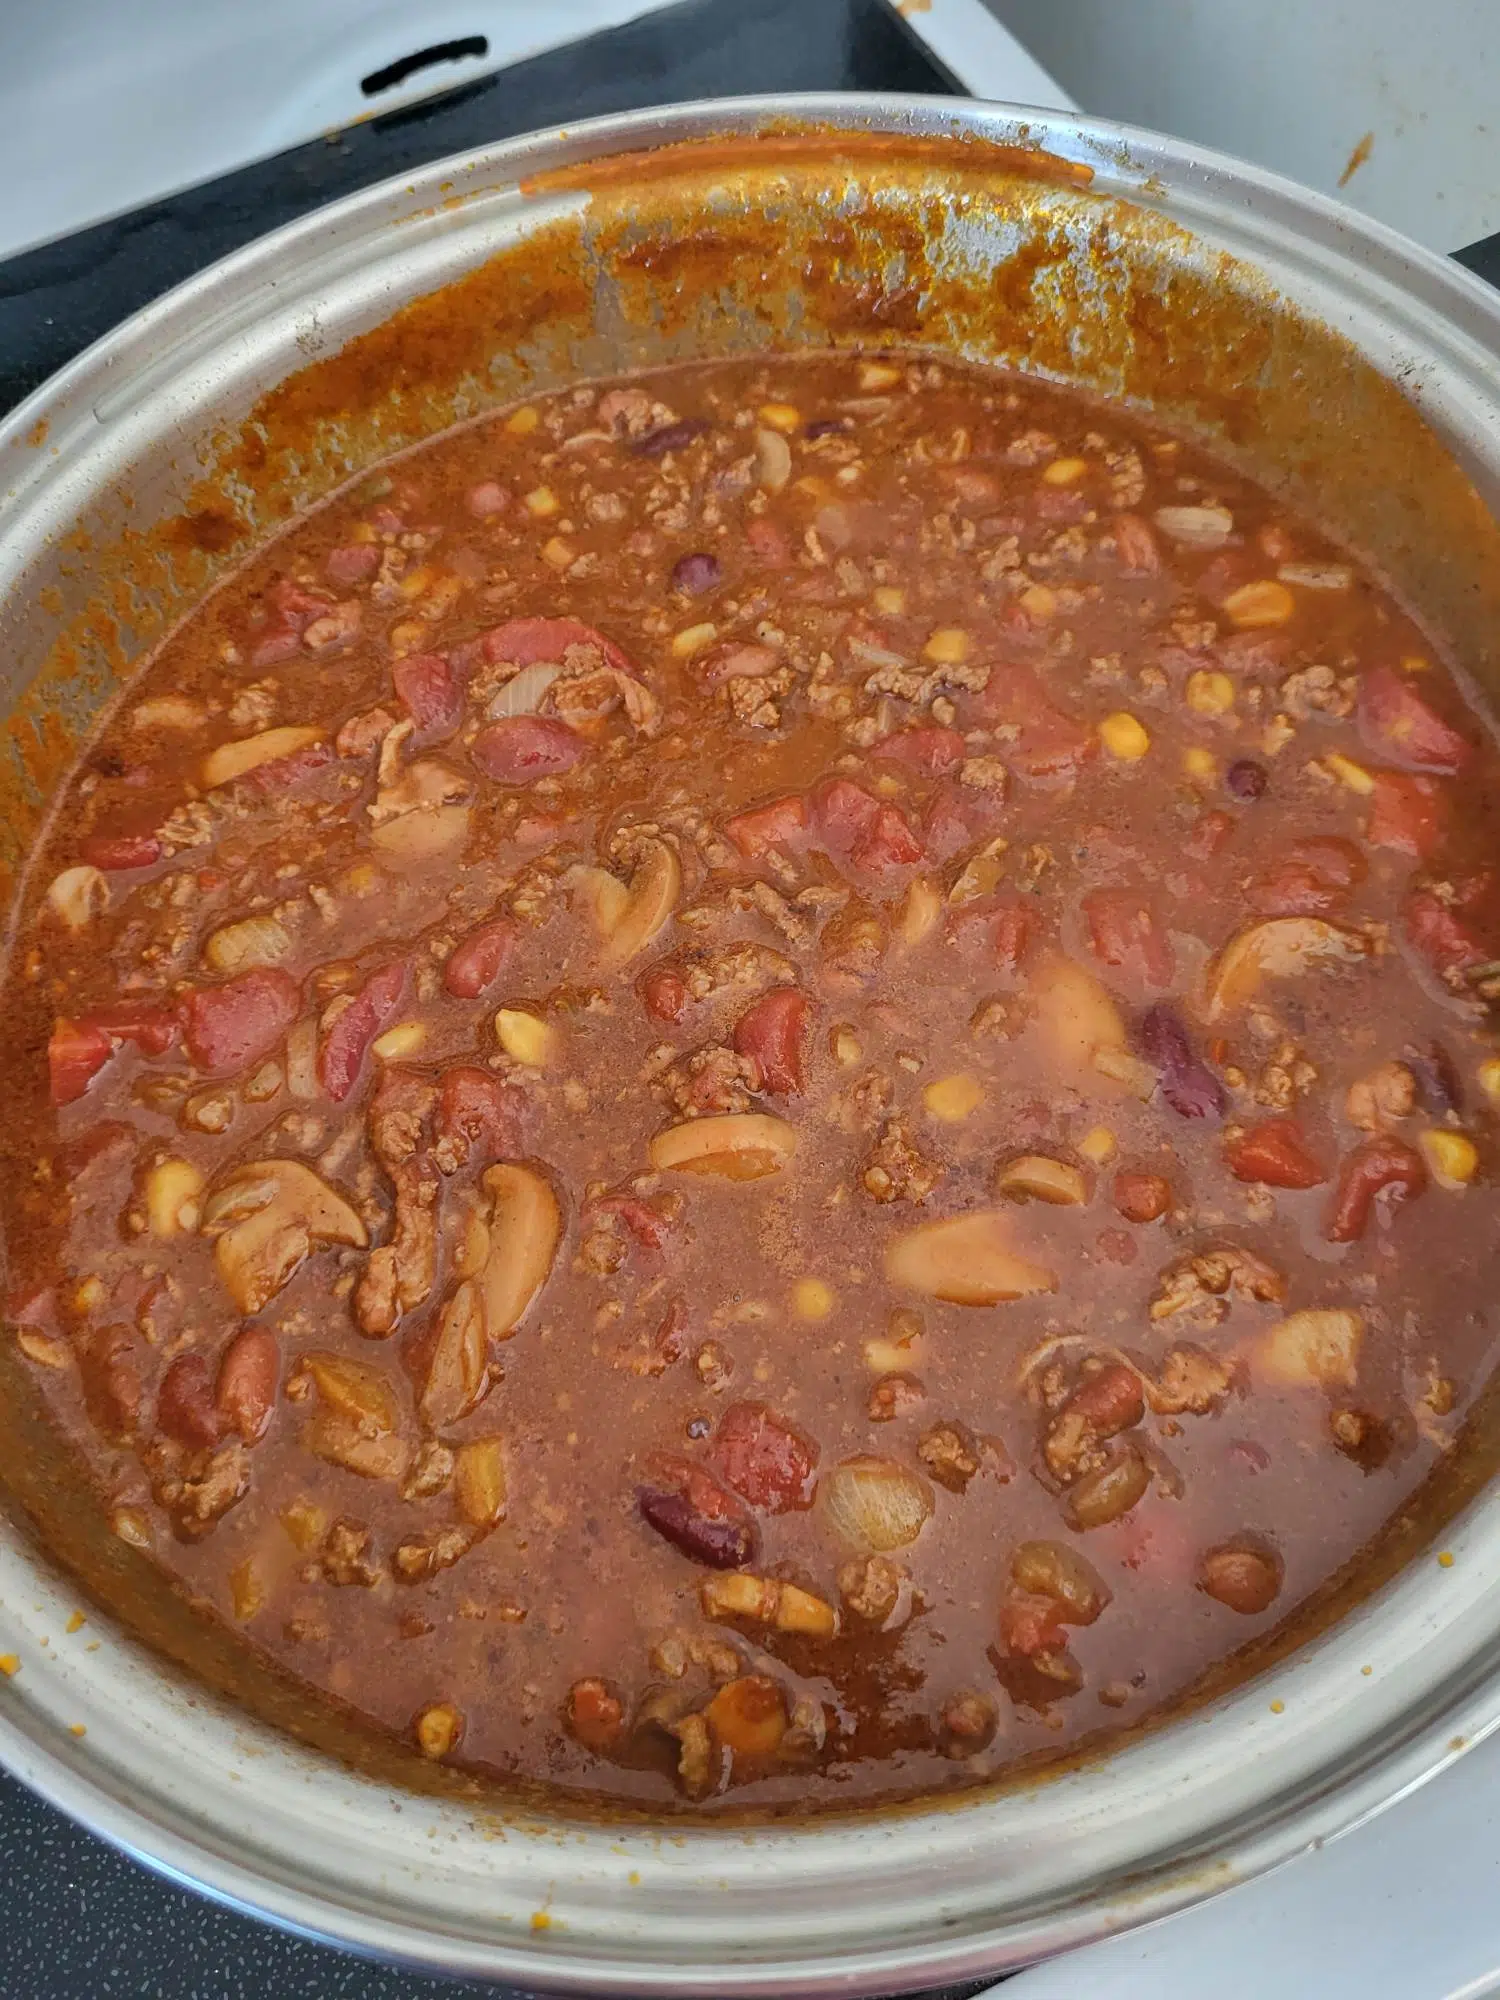 It's Chili Day ! What do you put in yours ?